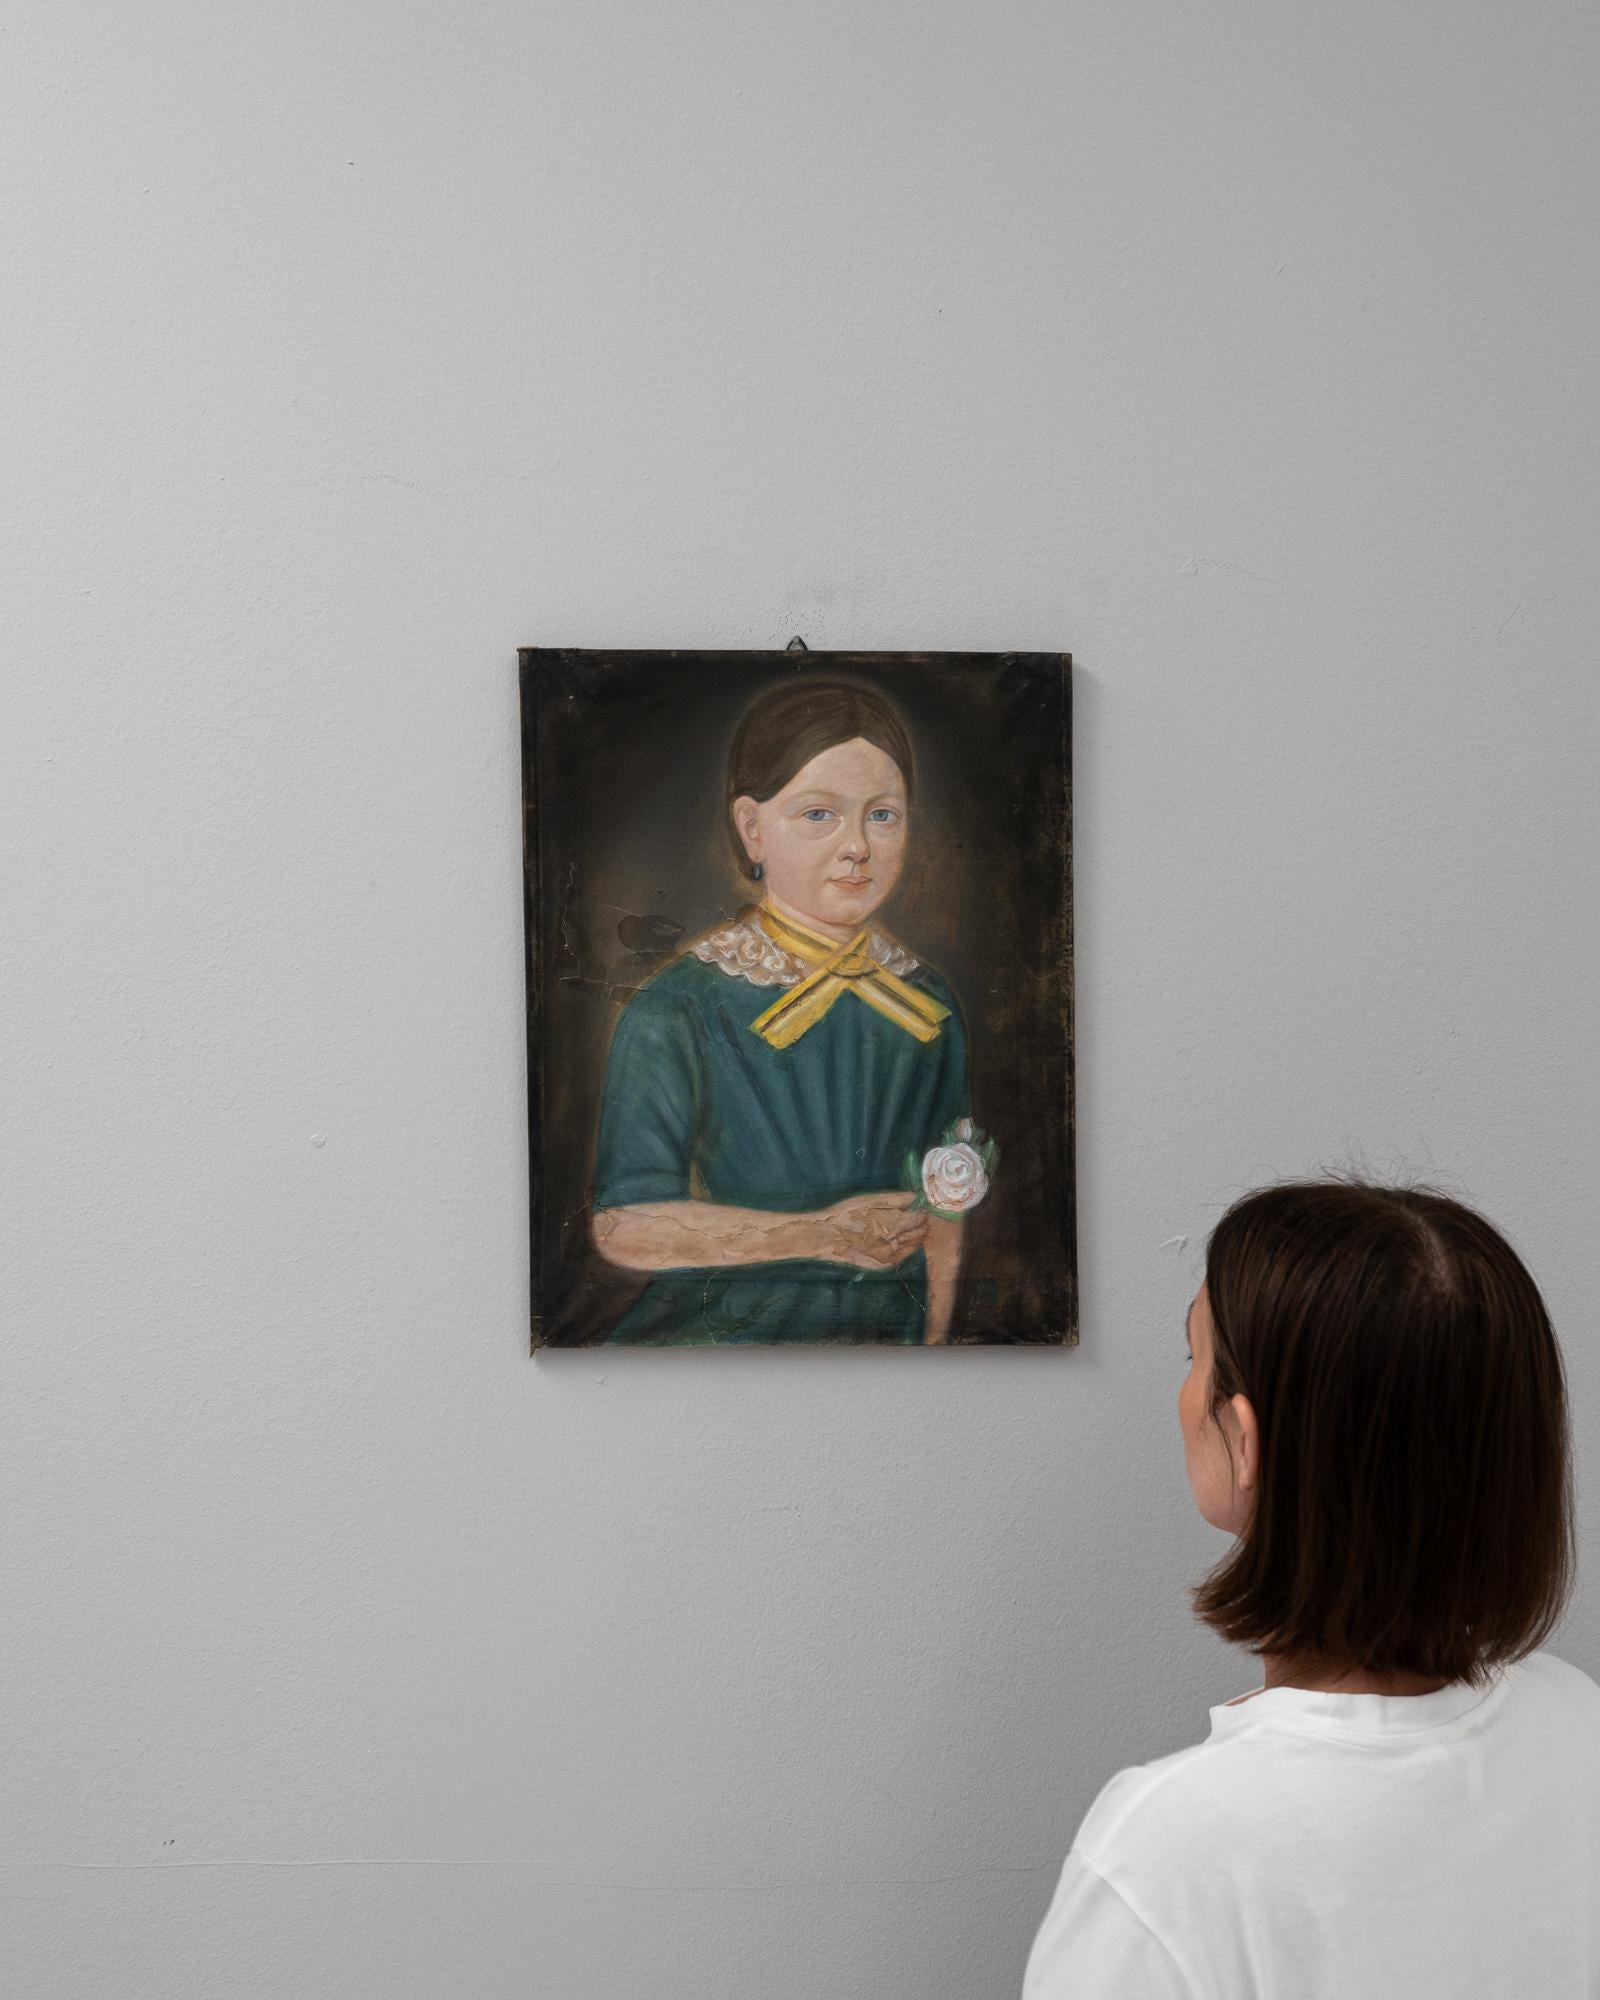 This early 20th Century Belgian painting captures the essence of a bygone era through its detailed portrayal of a young girl. The subject, dressed in a traditional green dress with yellow trim and clutching a small bouquet of flowers, is rendered